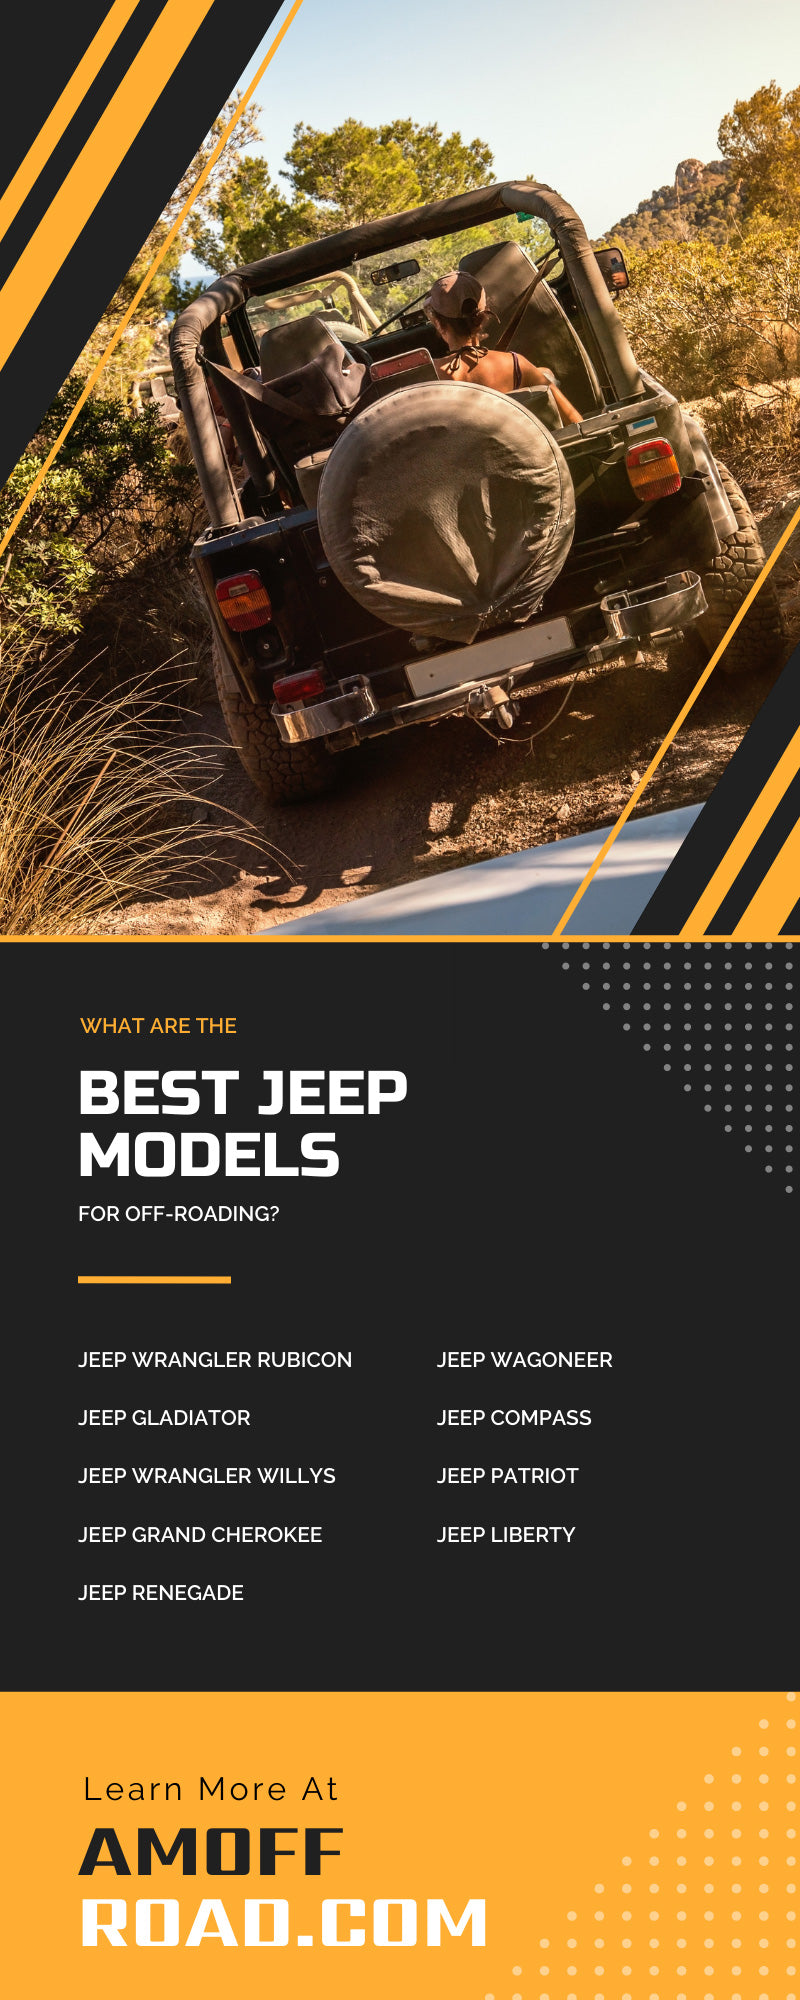 What Are the Best Jeep Models for Off-Roading?